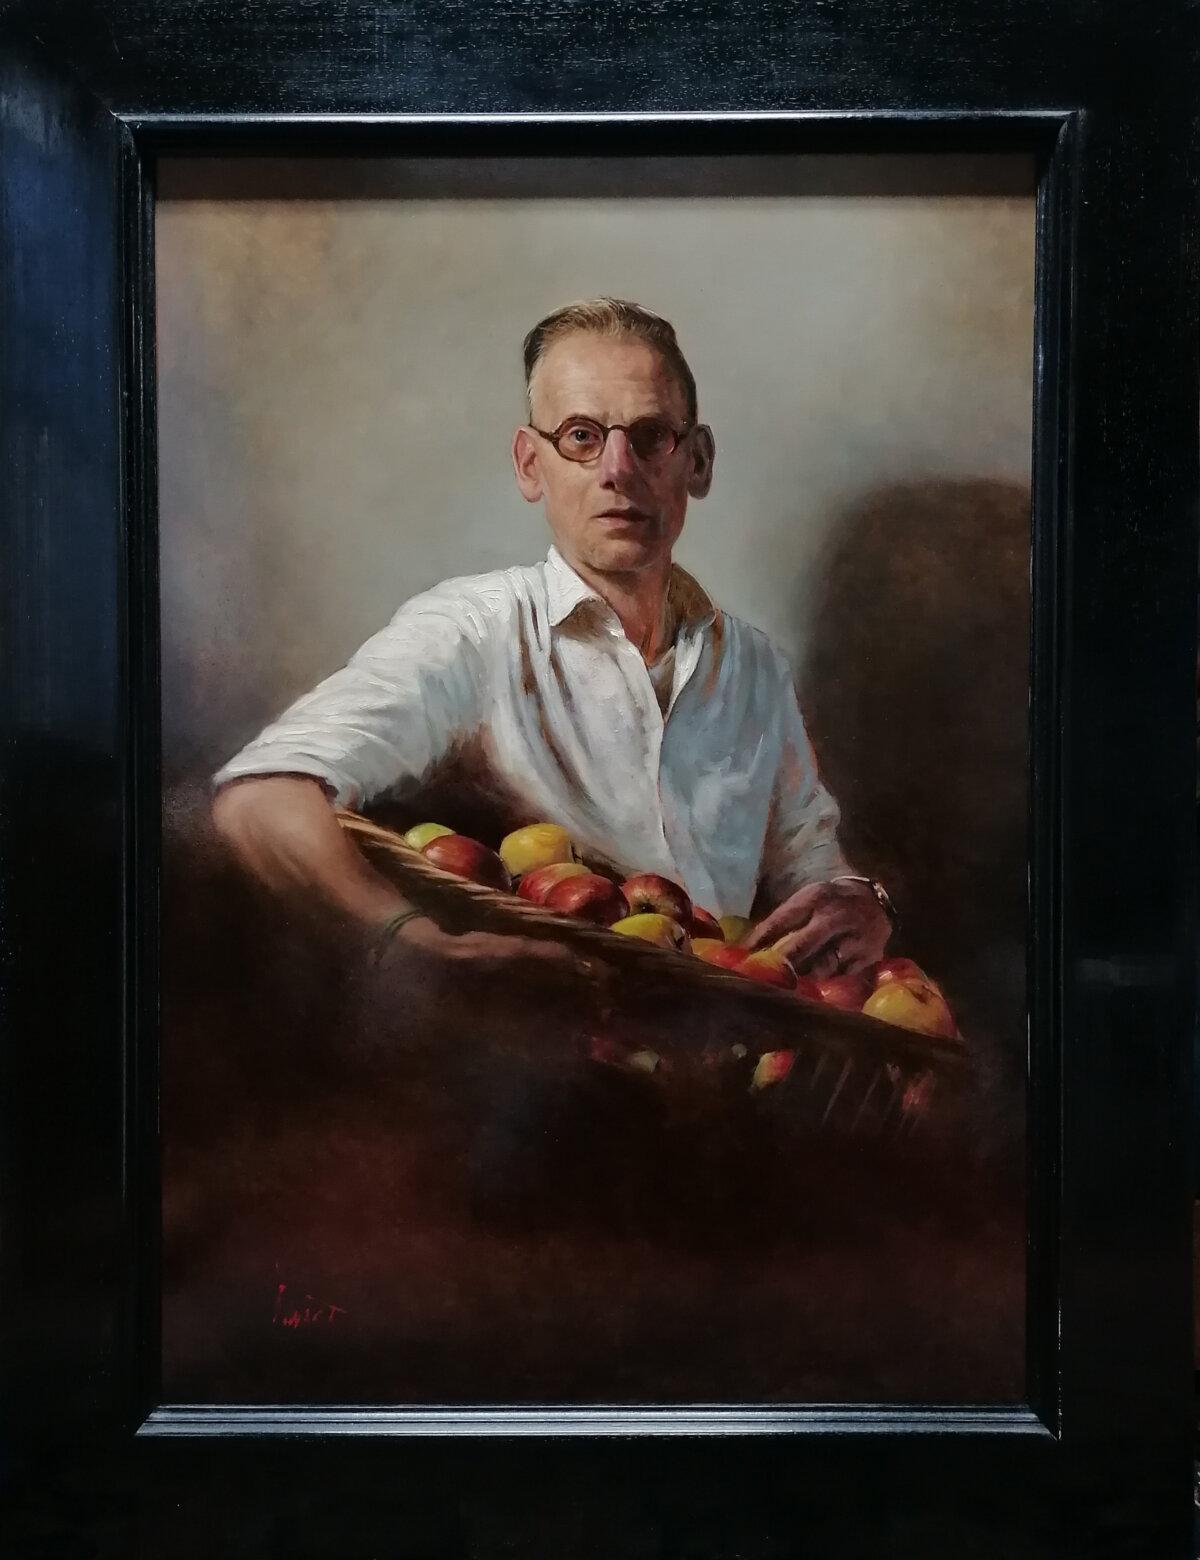 Dutch artist Nard Kwast has set his heart on painting like an old master. This year, he won an outstanding technique award for his 2020 portrait “Thom,” at the Sixth NTD International Figure Painting Competition." Oil on panel; 28 3/8 inches by 37 3/8 inches. (Courtesy of Nard Kwast)